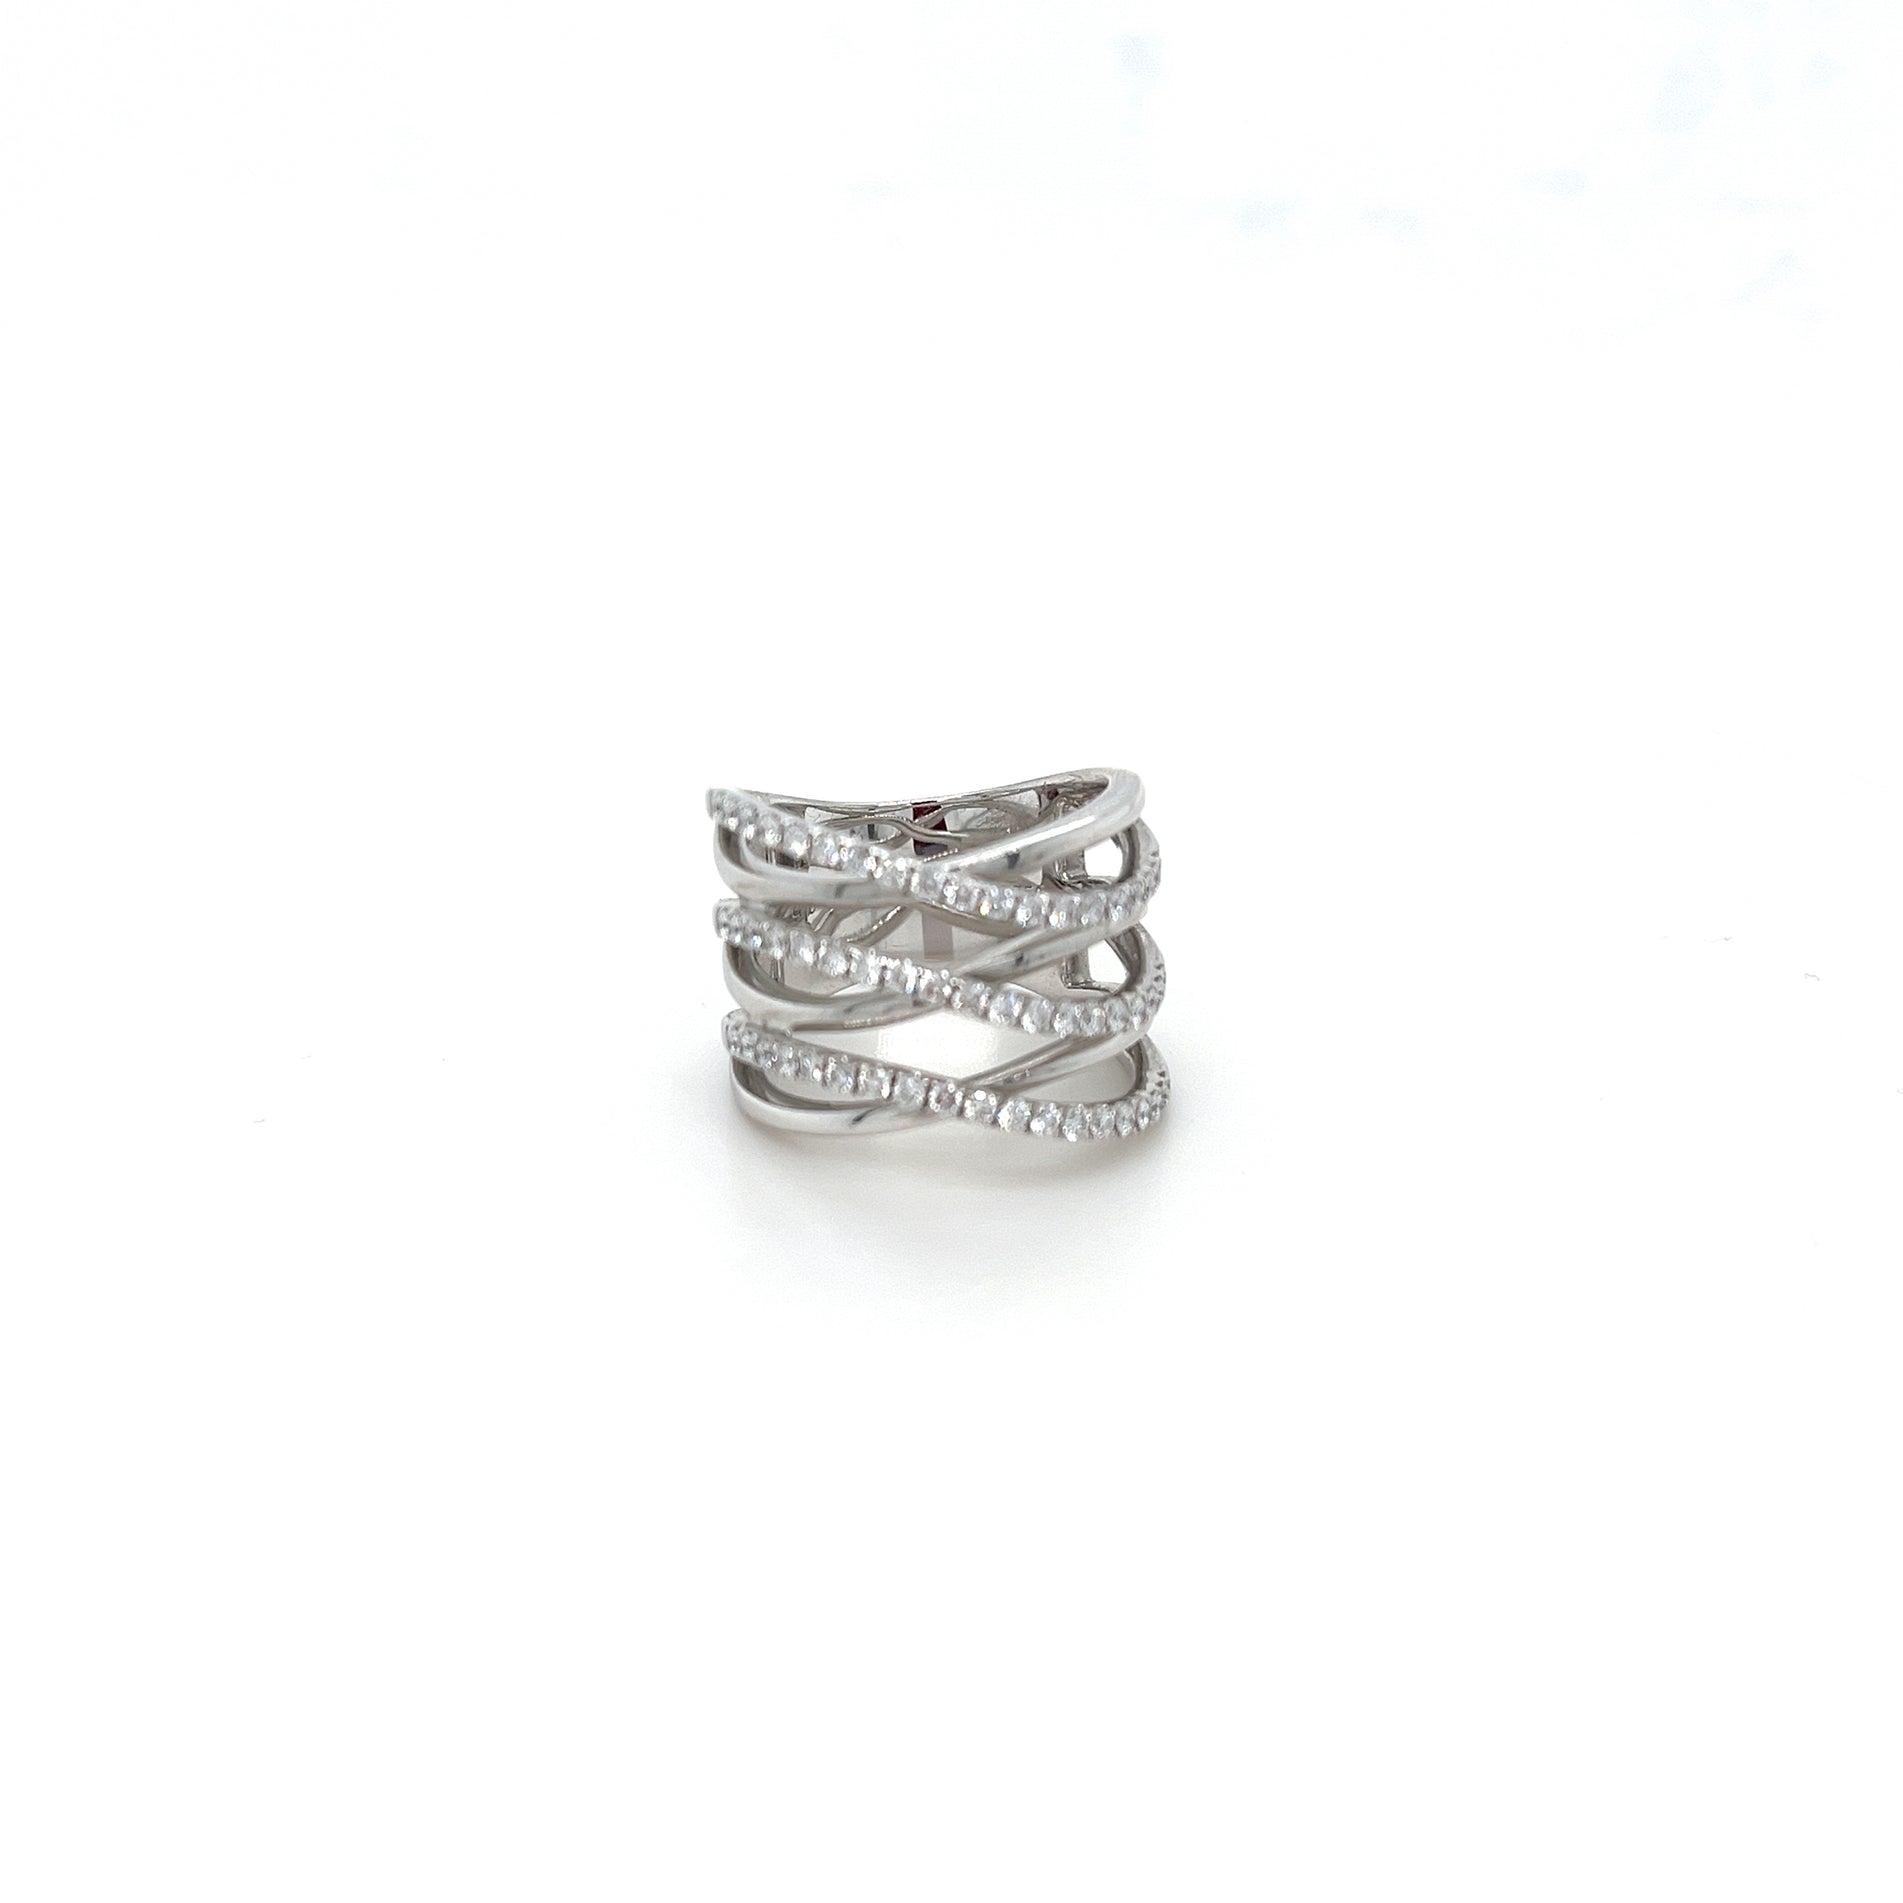 Hulchi Belluni Wave Collection Ring in 18k white gold with Diamonds, 57 pcs, 0.85ct - R1112